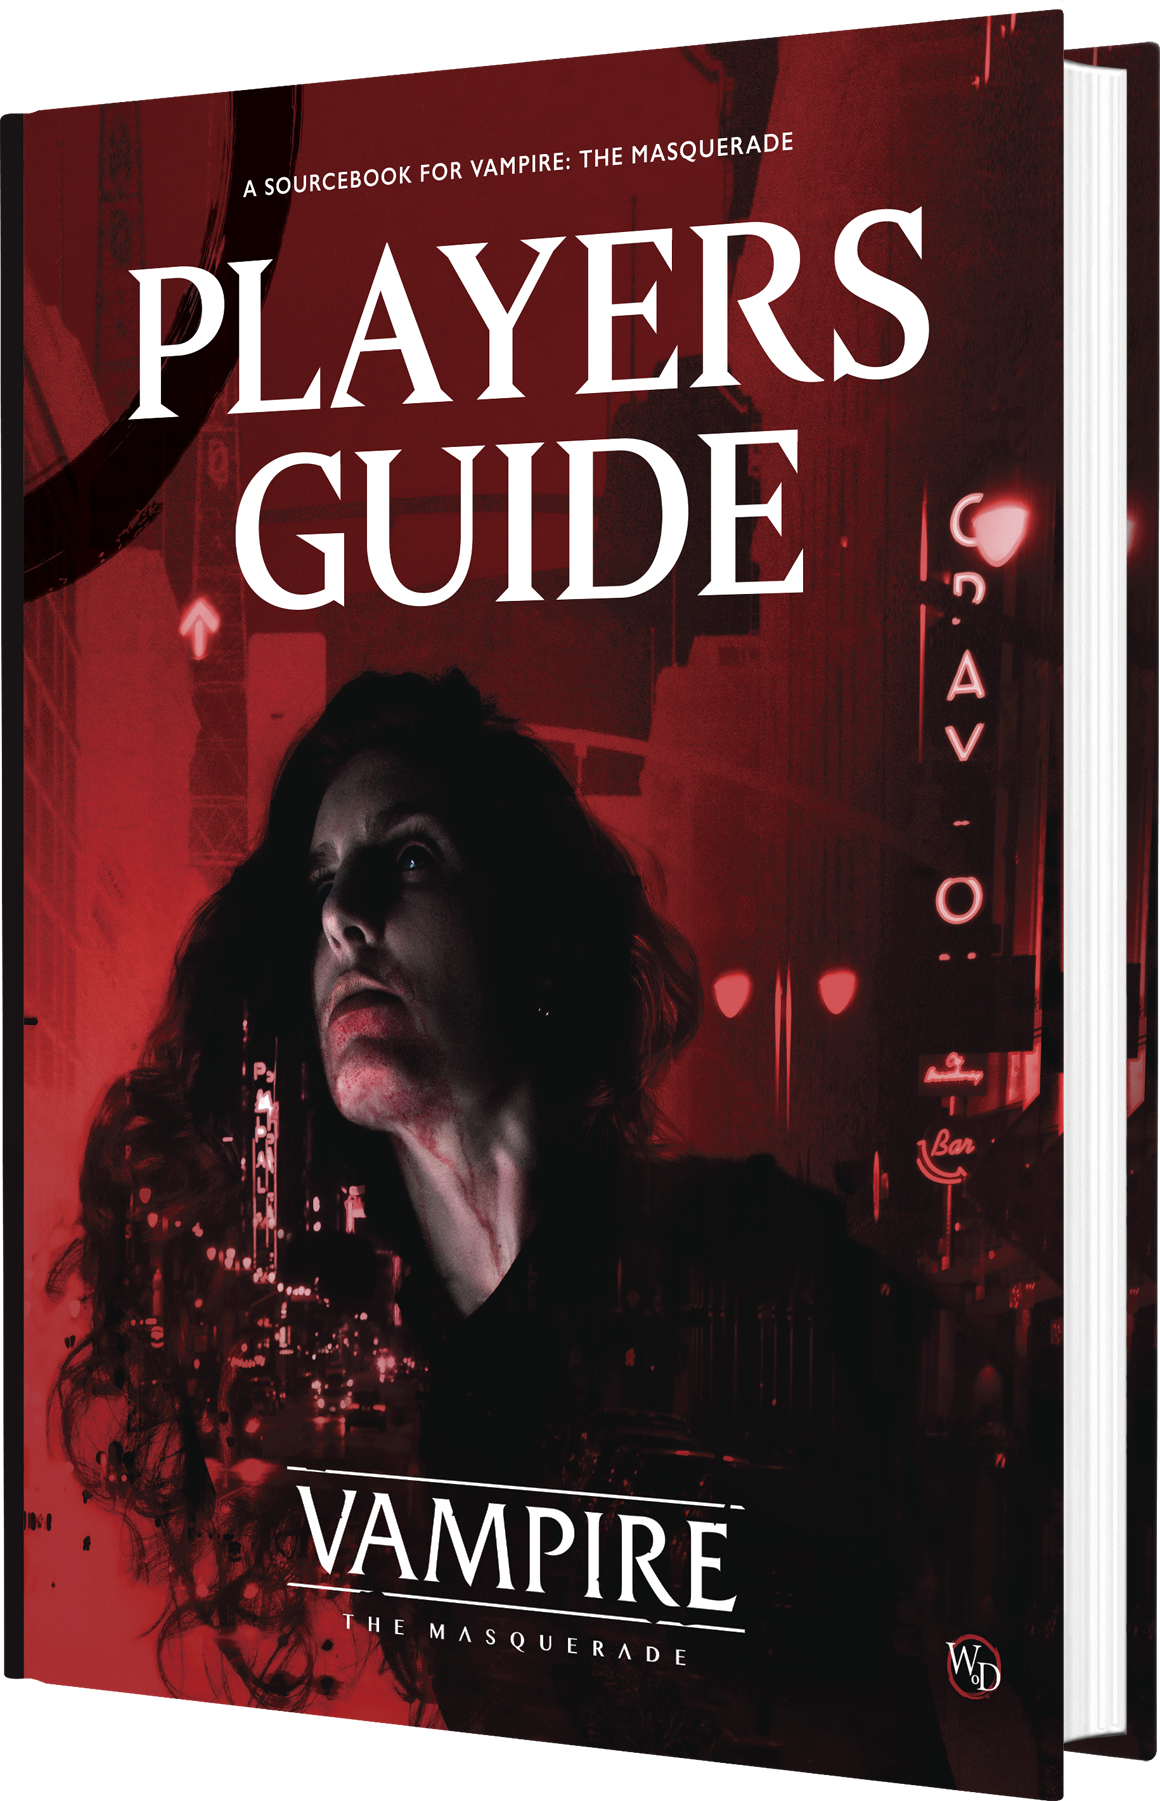 GTM #278 - Vampire the Masquerade: Players Guide